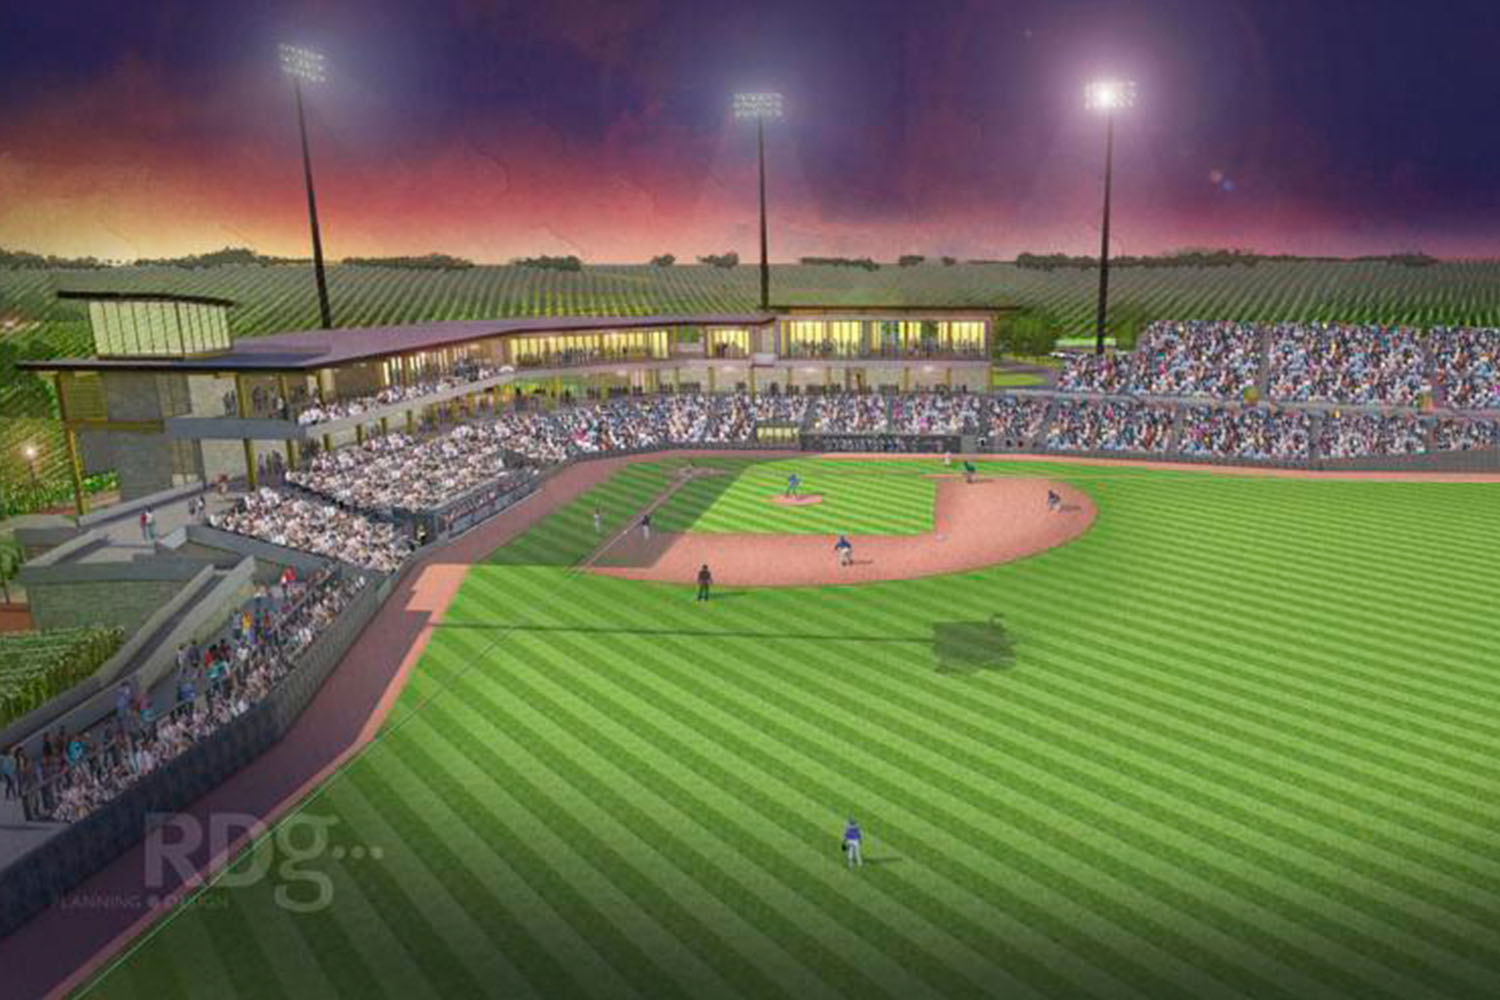 Iowa's $50M Plan For Permanent Stadium At 'Field Of Dreams' Site